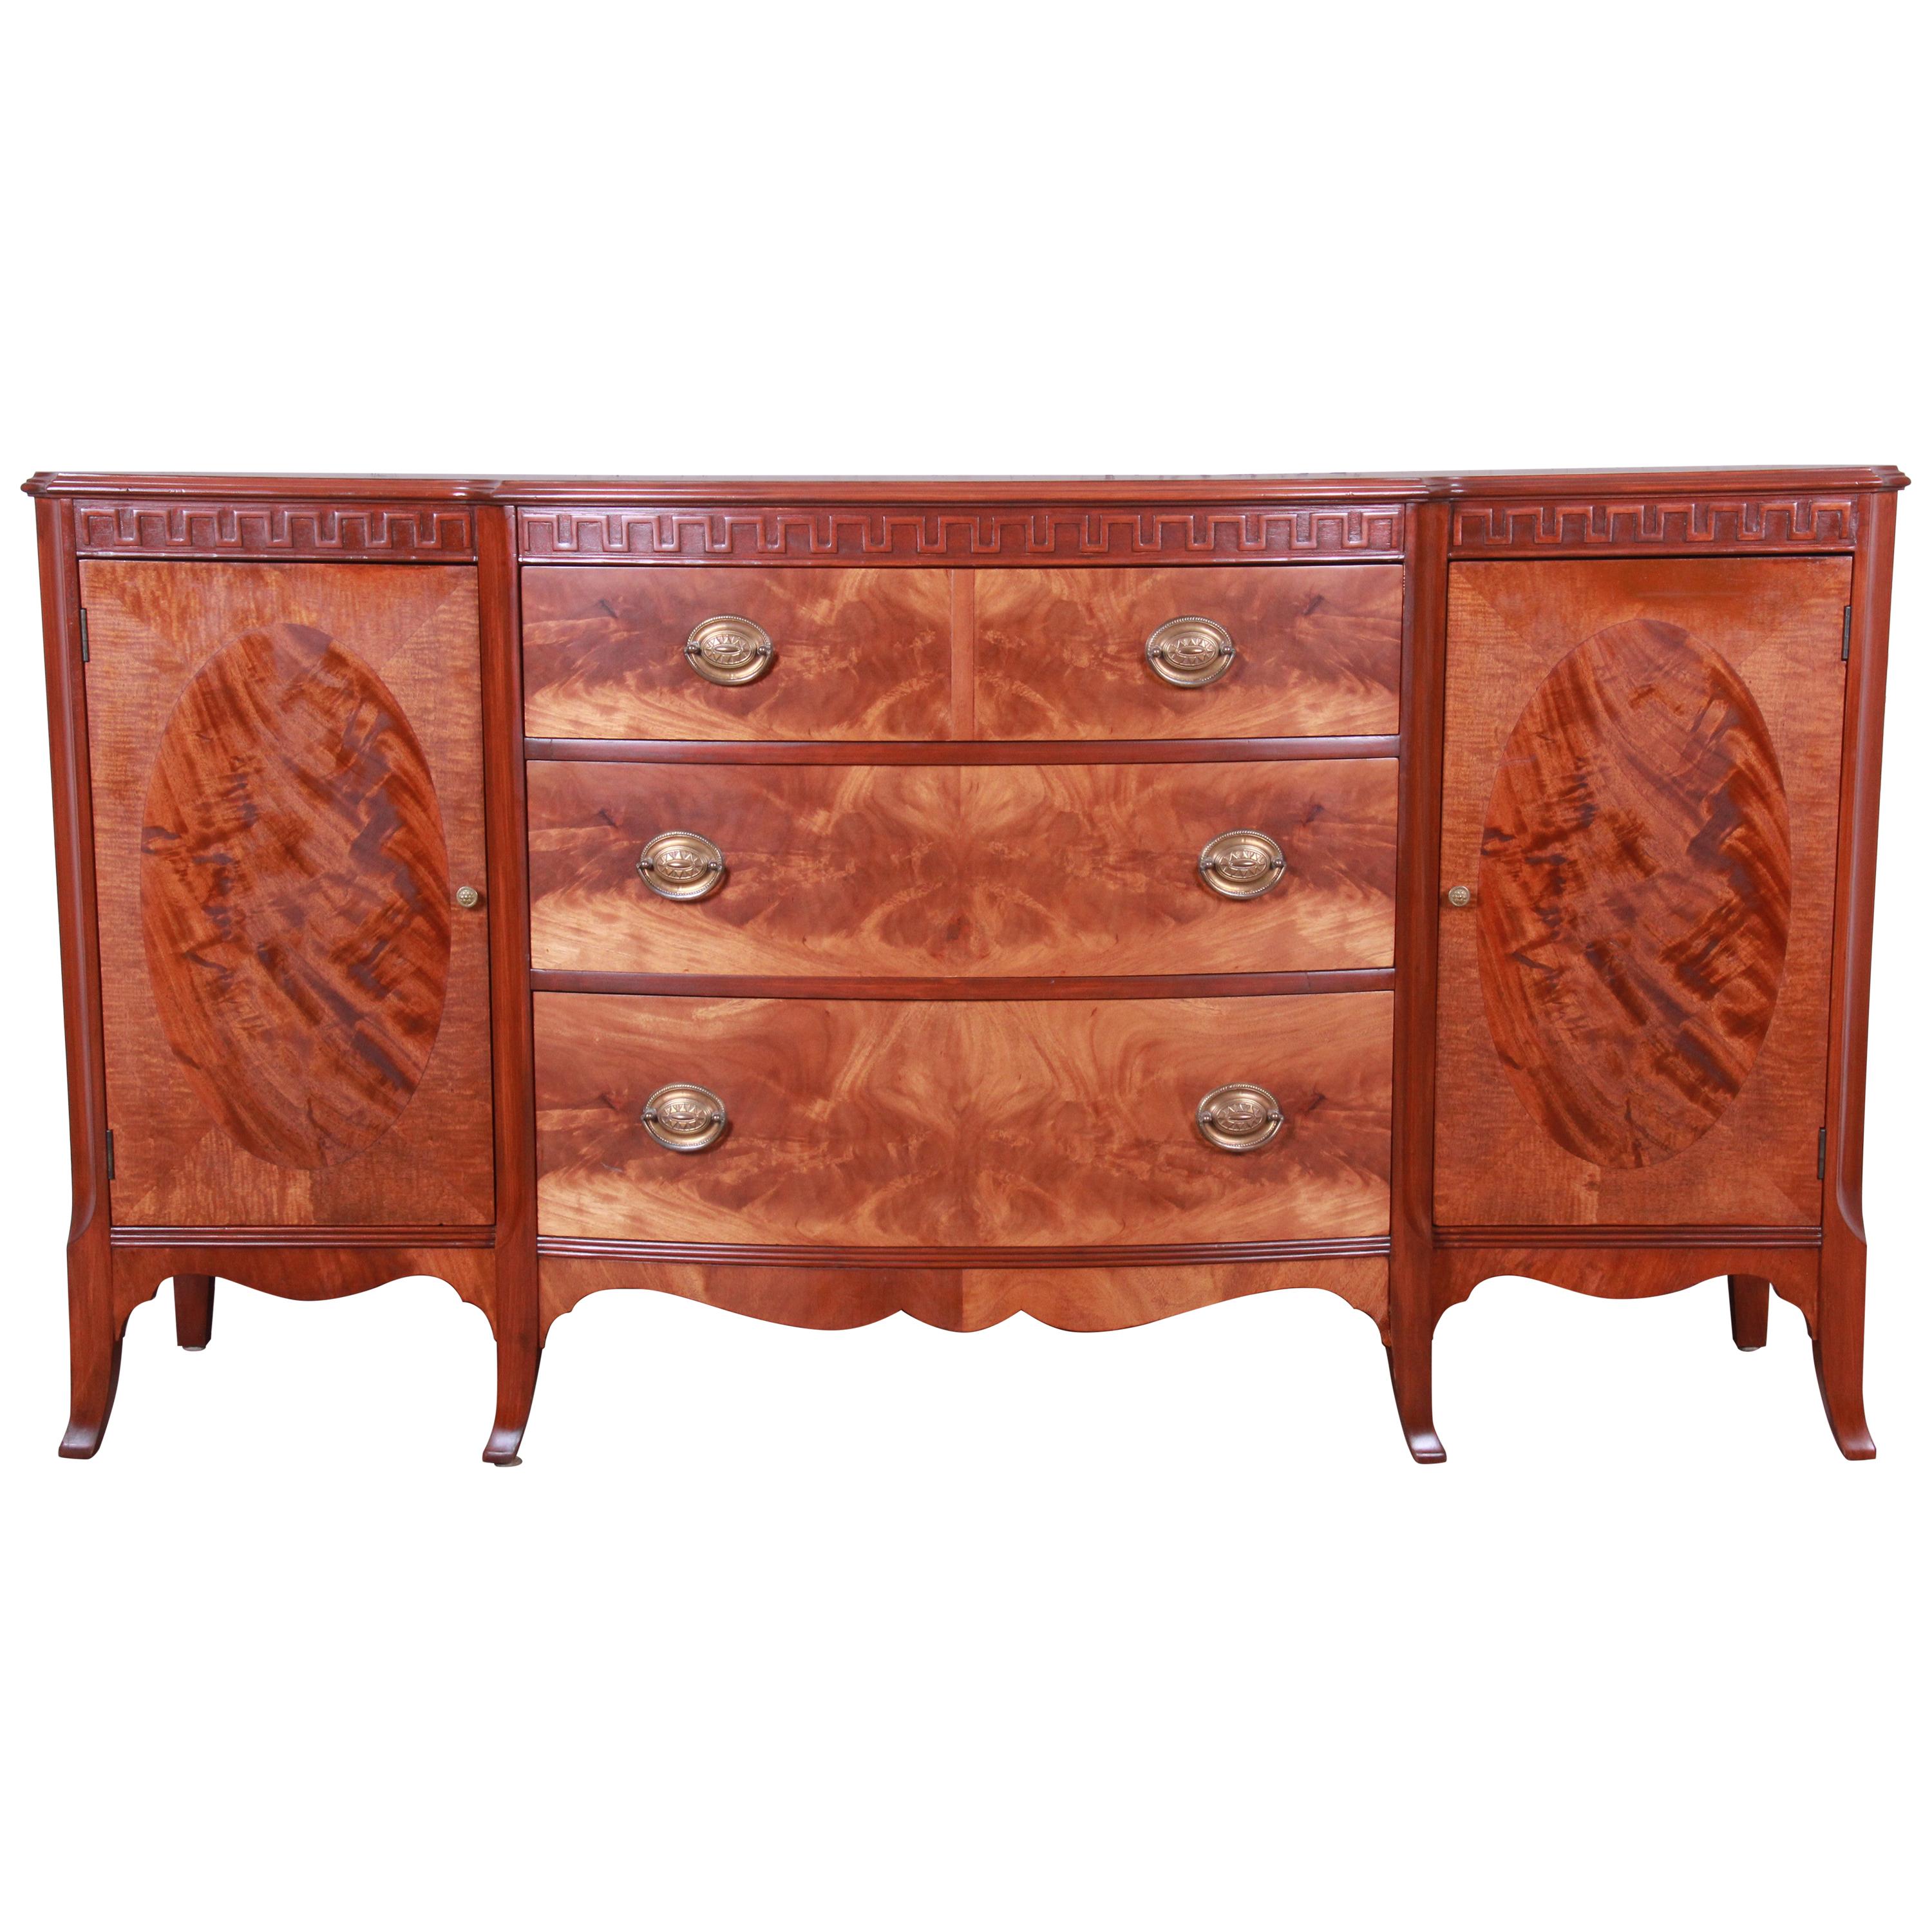 Romweber Mahogany and Burl Sideboard Credenza or Bar Cabinet, Newly Refinished